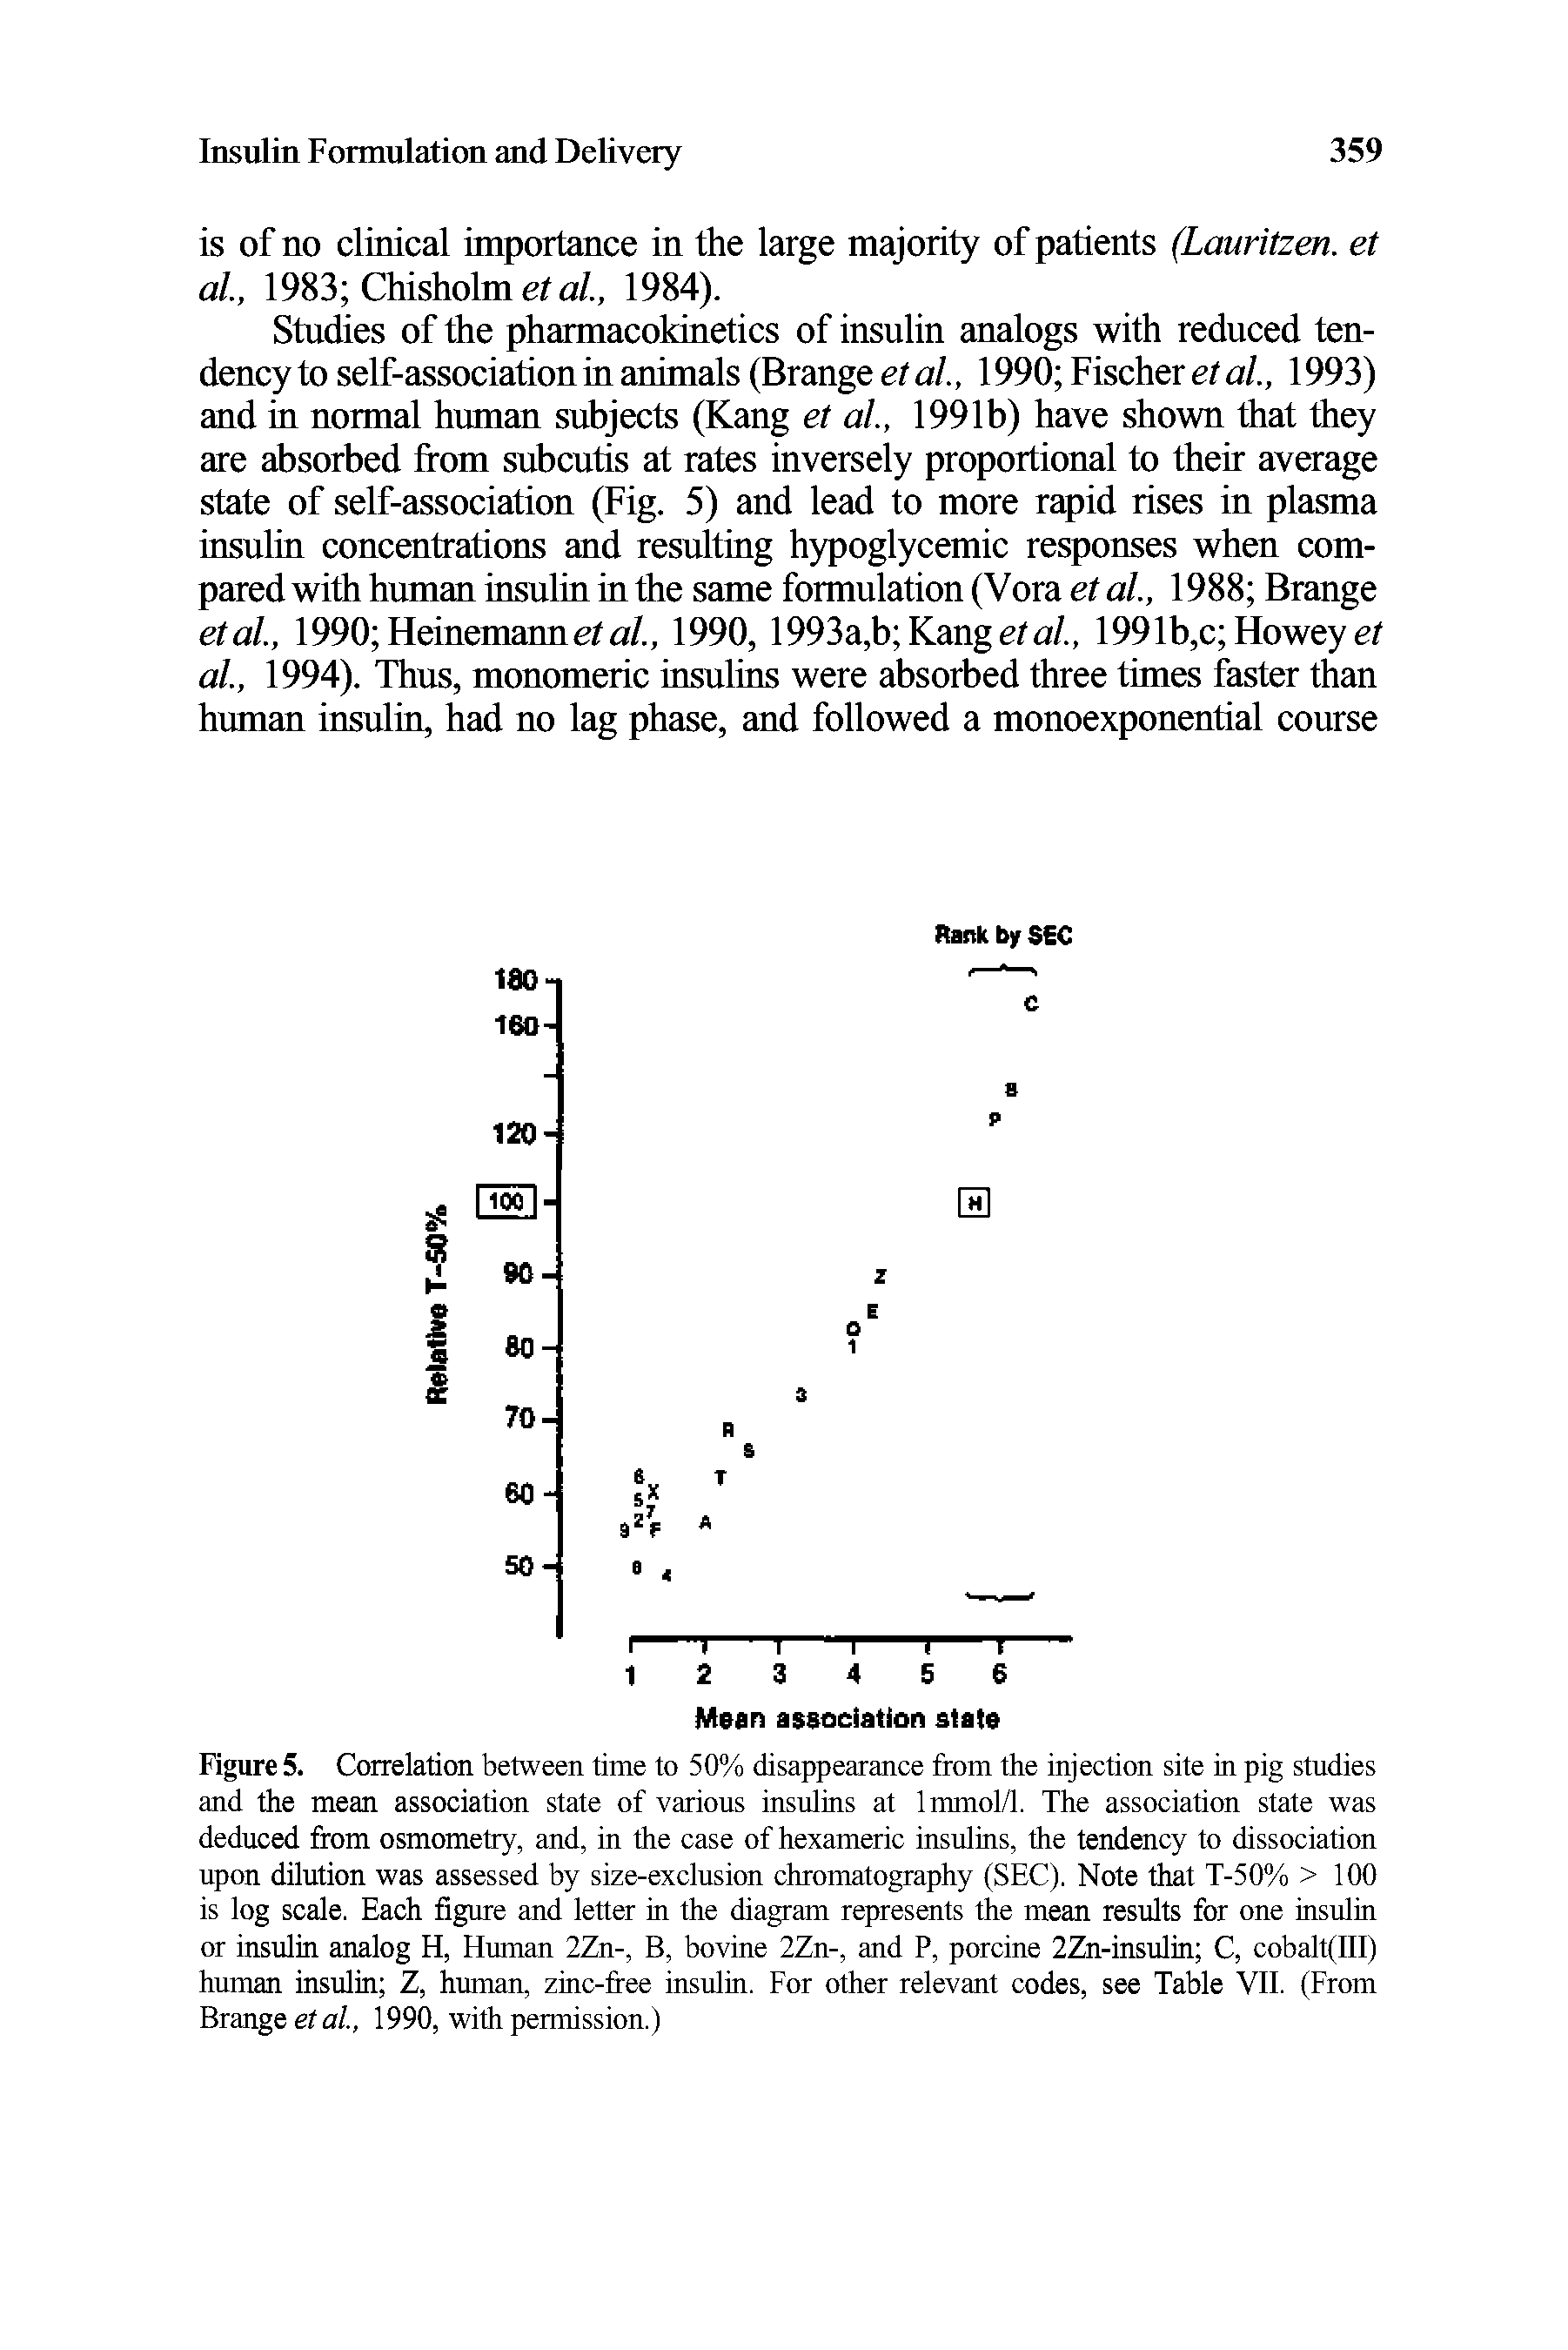 Figure 5. Correlation between time to 50% disappearance from the injection site in pig studies and the mean association state of various insulins at lmmol/1. The association state was deduced from osmometry, and, in the case of hexameric insulins, the tendency to dissociation upon dilution was assessed by size-exclusion chromatography (SEC). Note that T-50% > 100 is log scale. Each figure and letter in the diagram represents the mean results for one insulin or insulin analog H, Human 2Zn-, B, bovine 2Zn-, and P, porcine 2Zn-insulin C, cobalt(III) human insulin Z, human, zinc-free insulin. For other relevant codes, see Table VII. (From Brange ei a/., 1990, with permission.)...